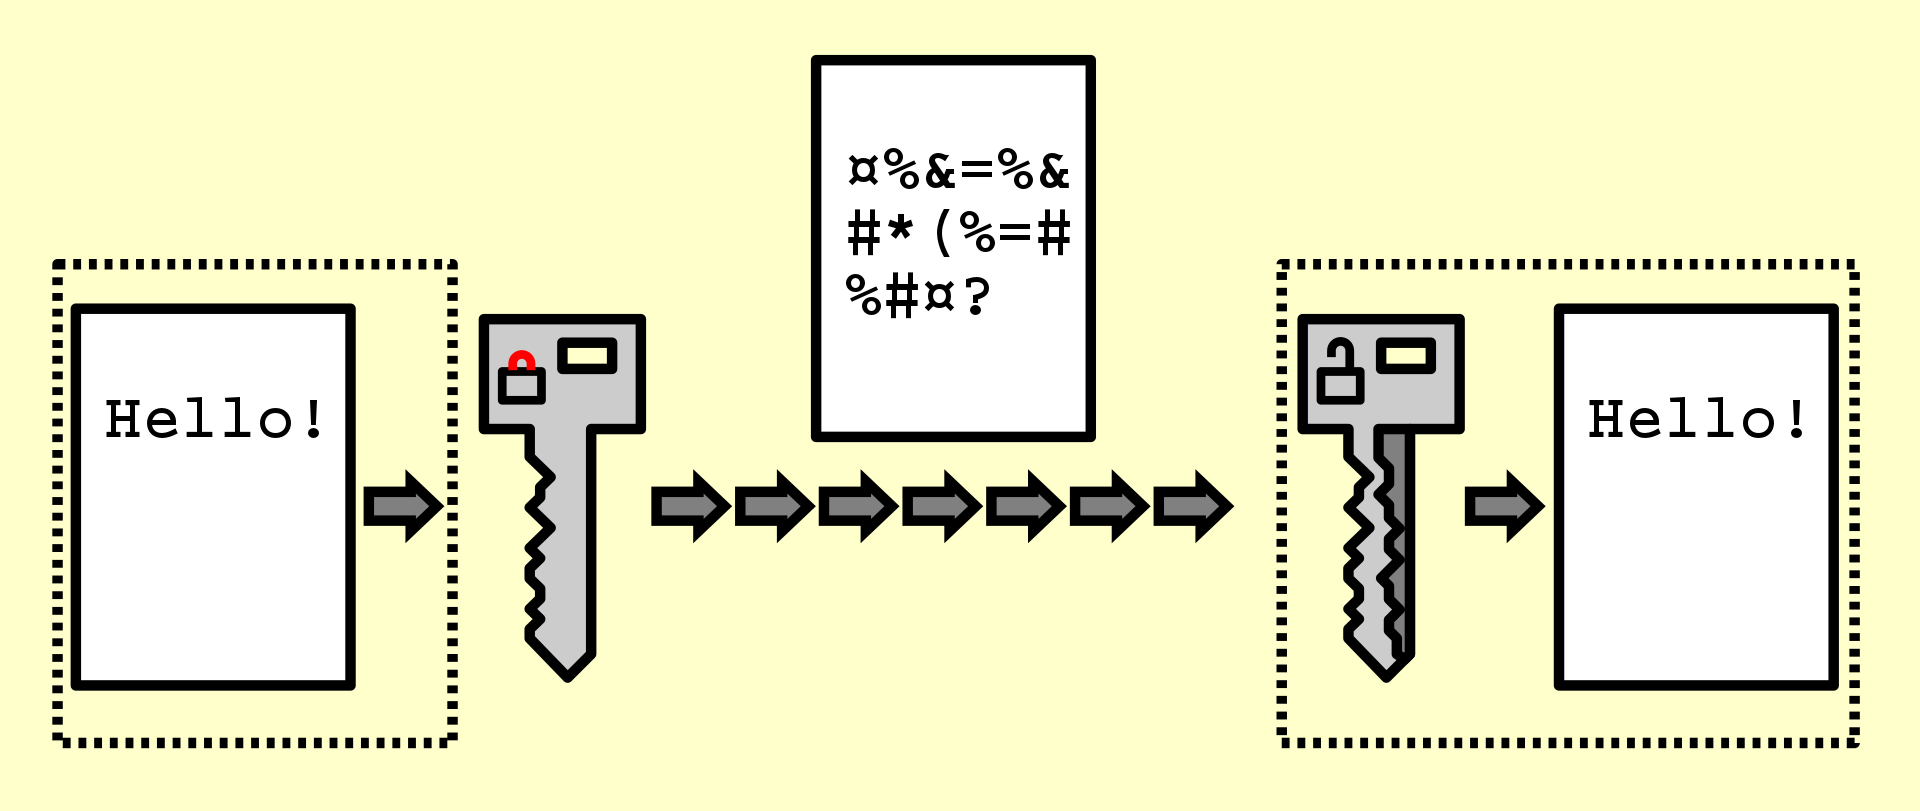 Illustration of public-key encryption being used to protect a file sent across an open channel